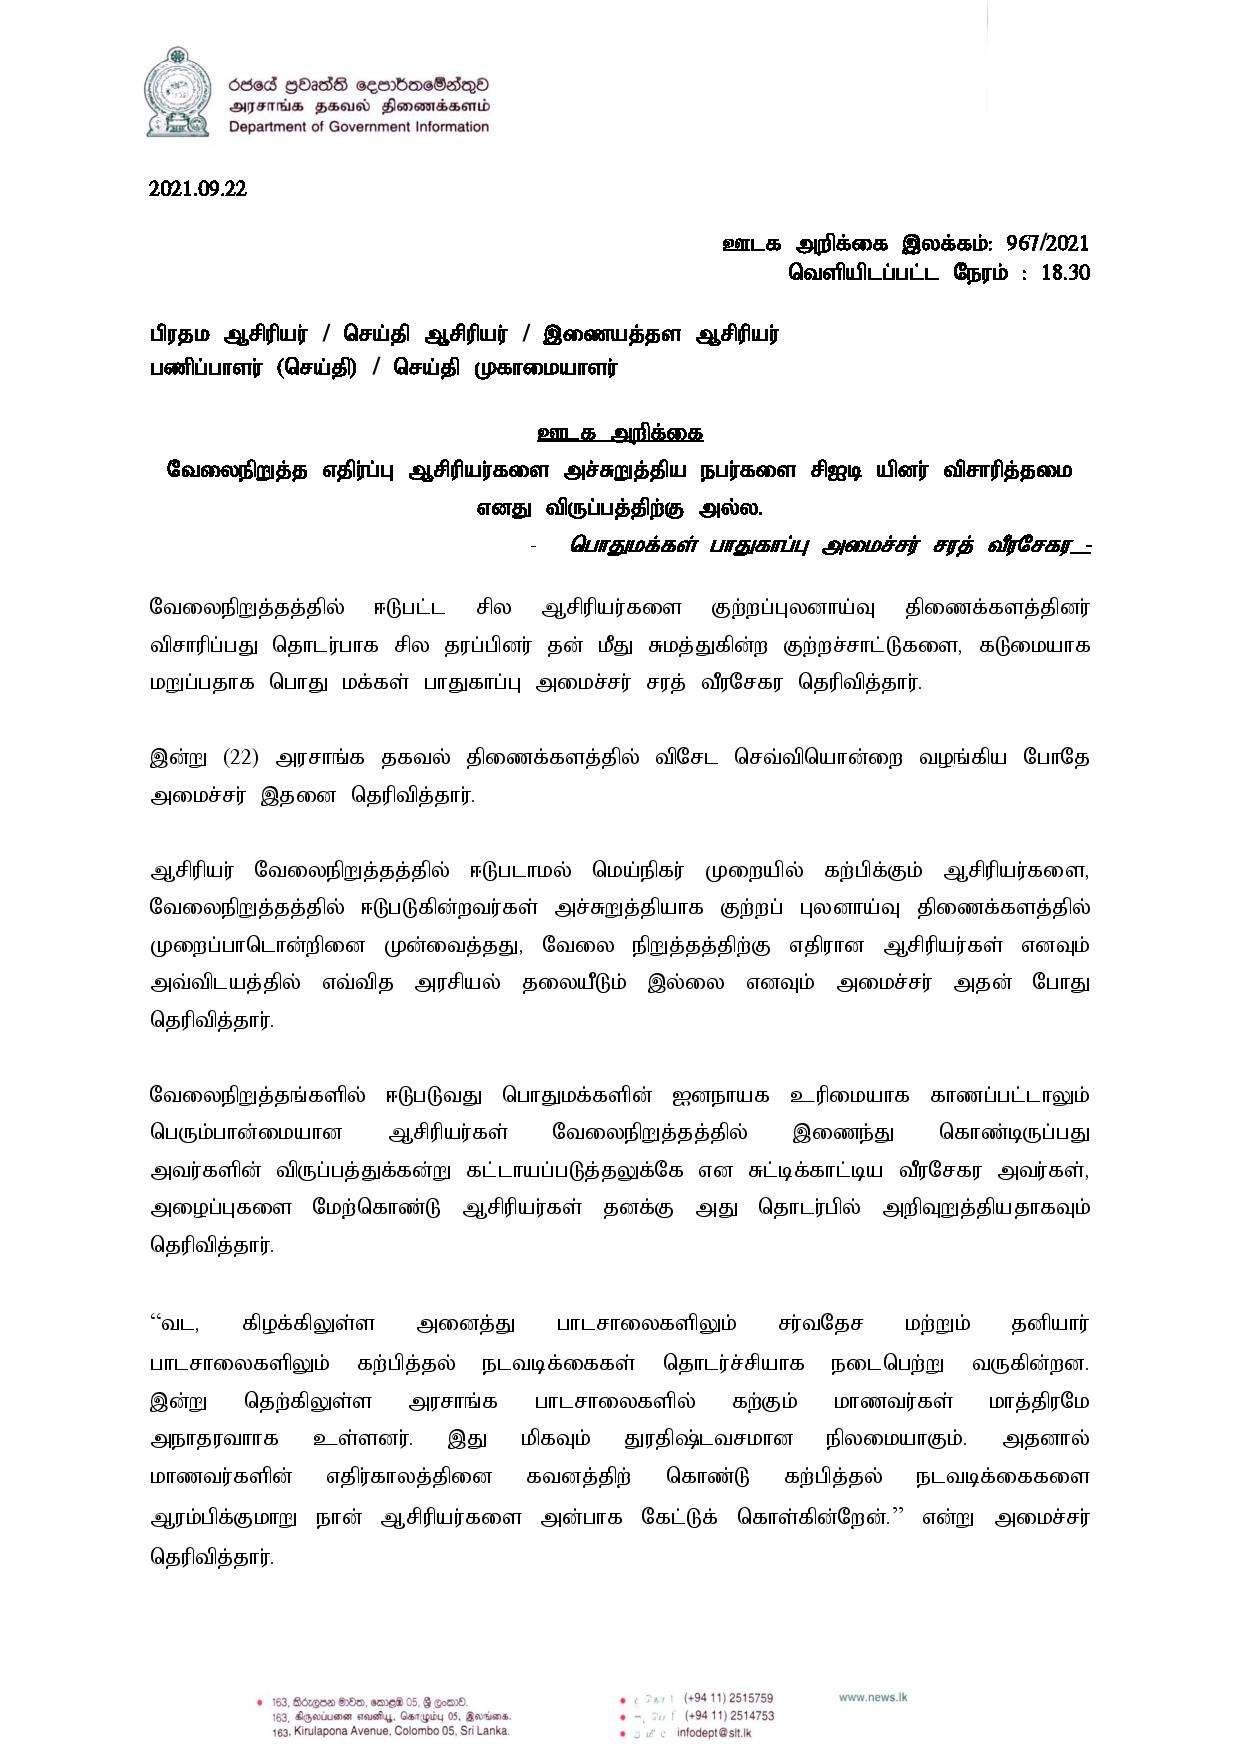 Press Release 967 Tamil page 001